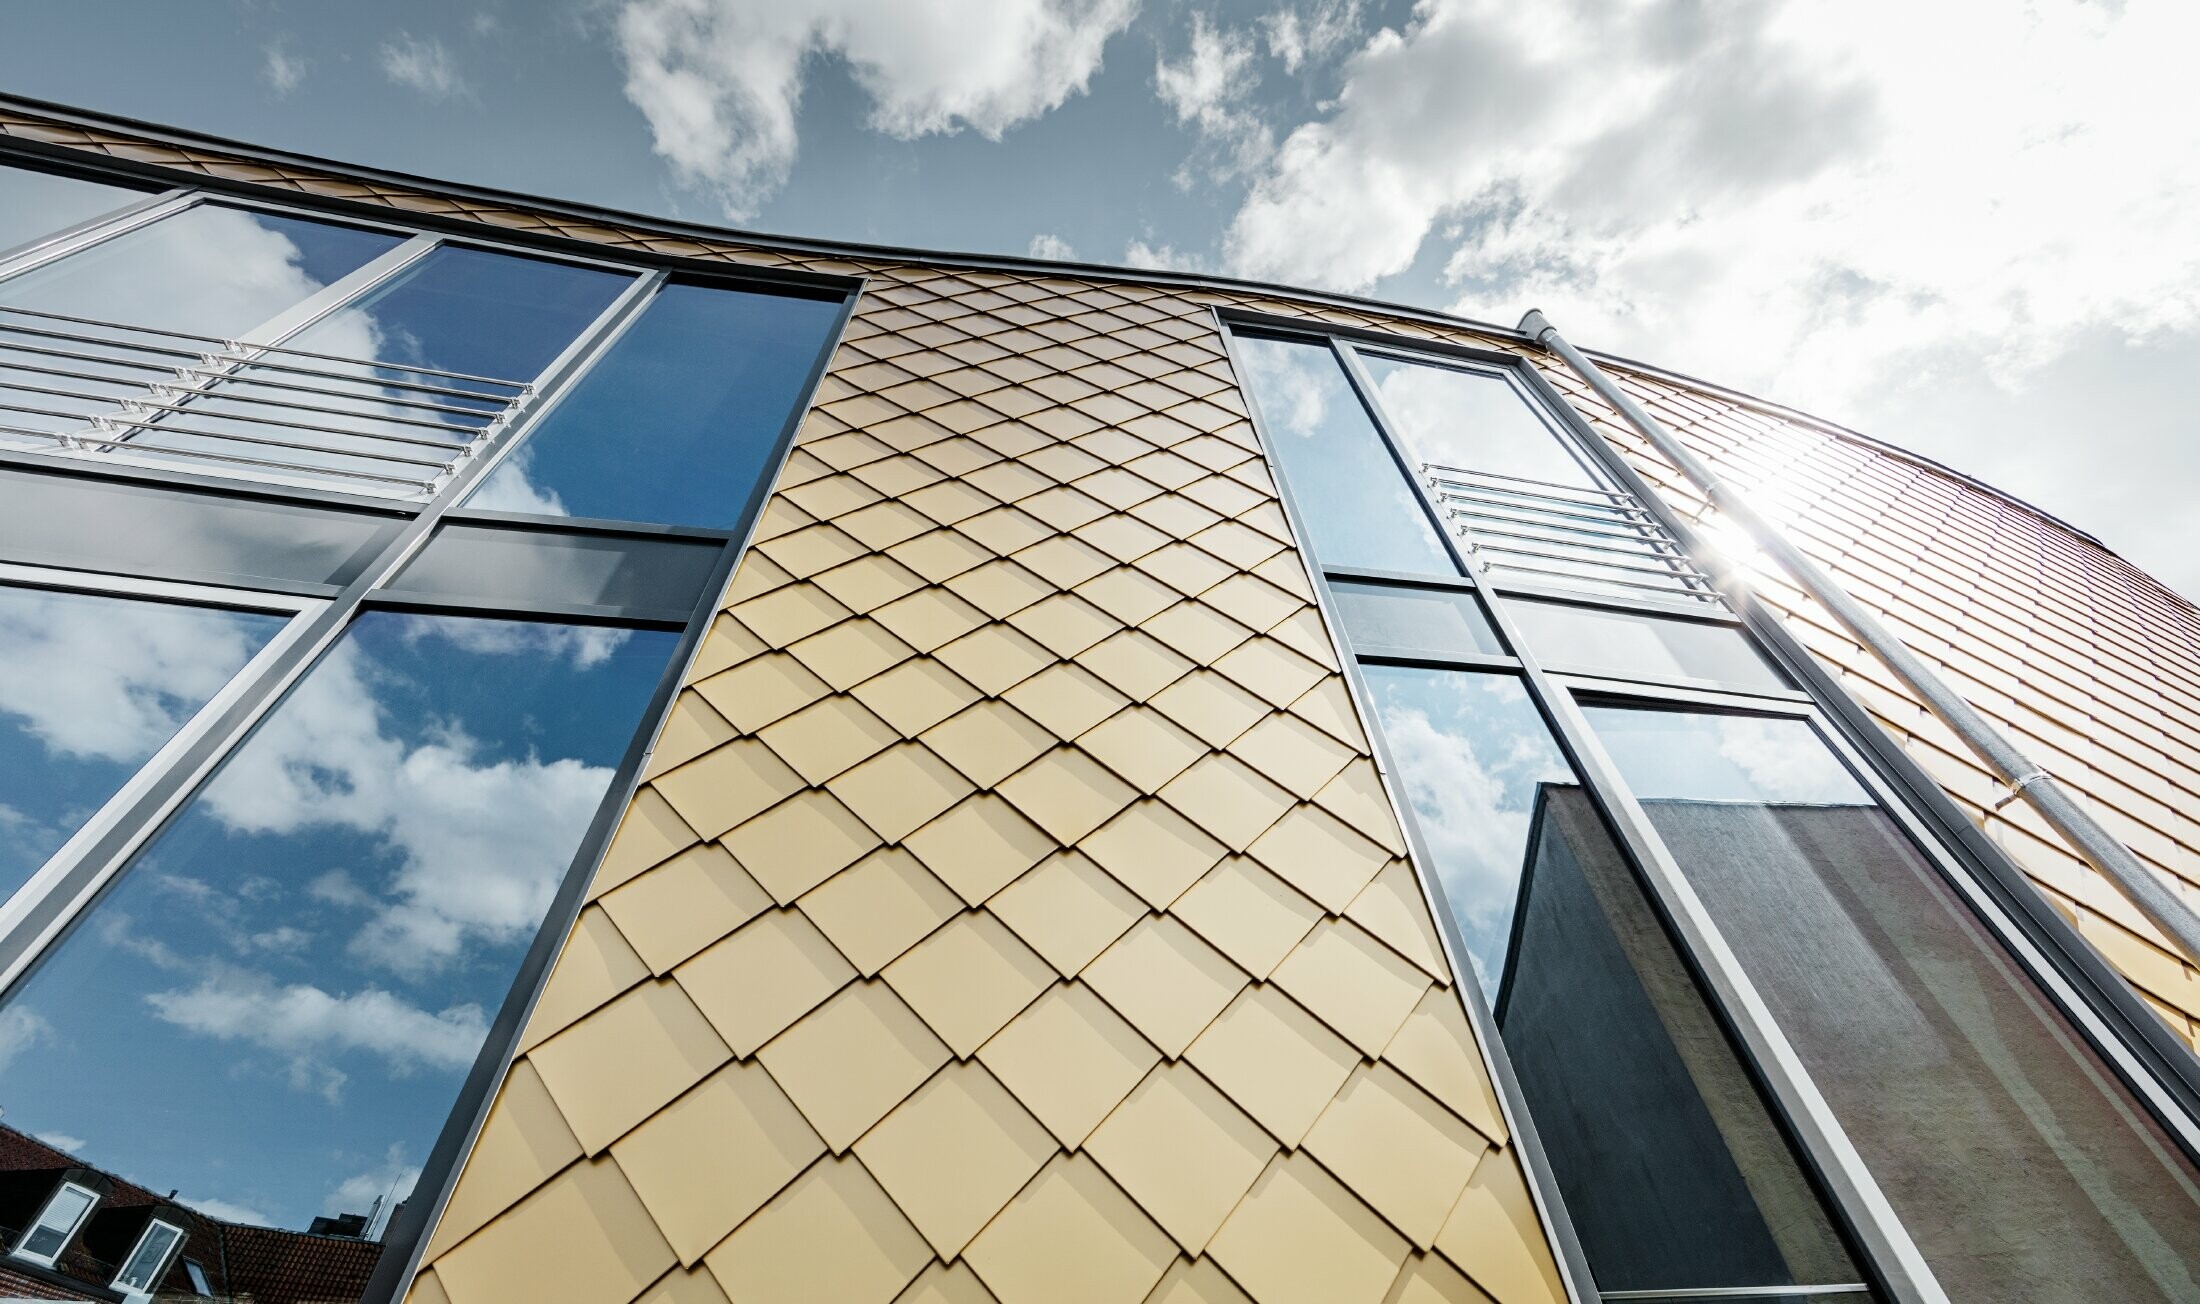 PREFA golden aluminium rhomboid tile in Mayan gold. The large glazed areas on the façade of the office building.